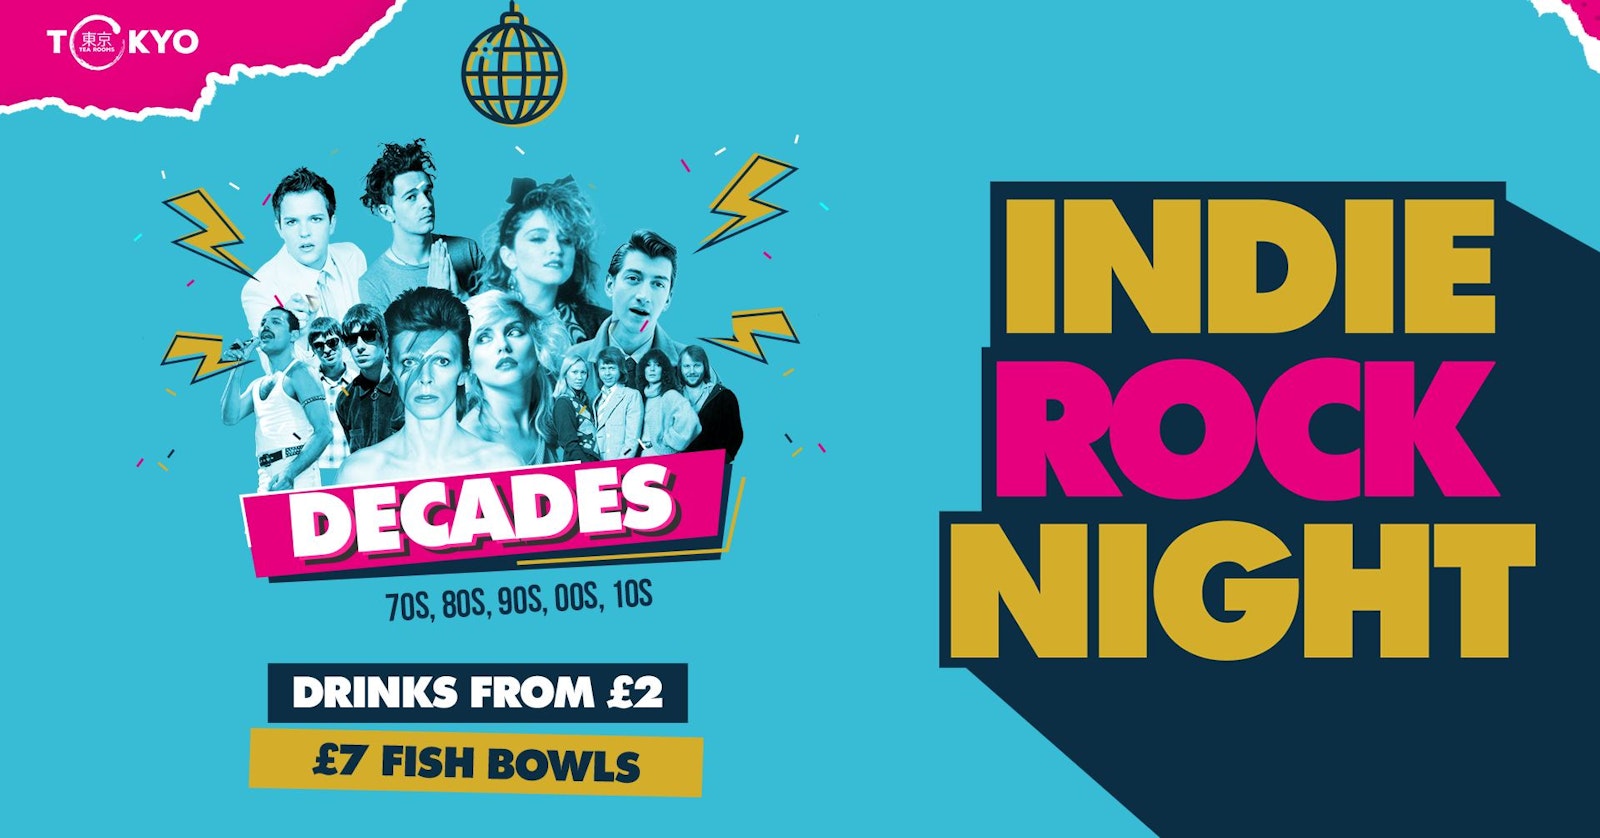 Indie Rock Night ∙ DECADES (60s, 70s, 80s, 90s, 00s, 10s) *ONLY 5 £2 TICKETS LEFT*